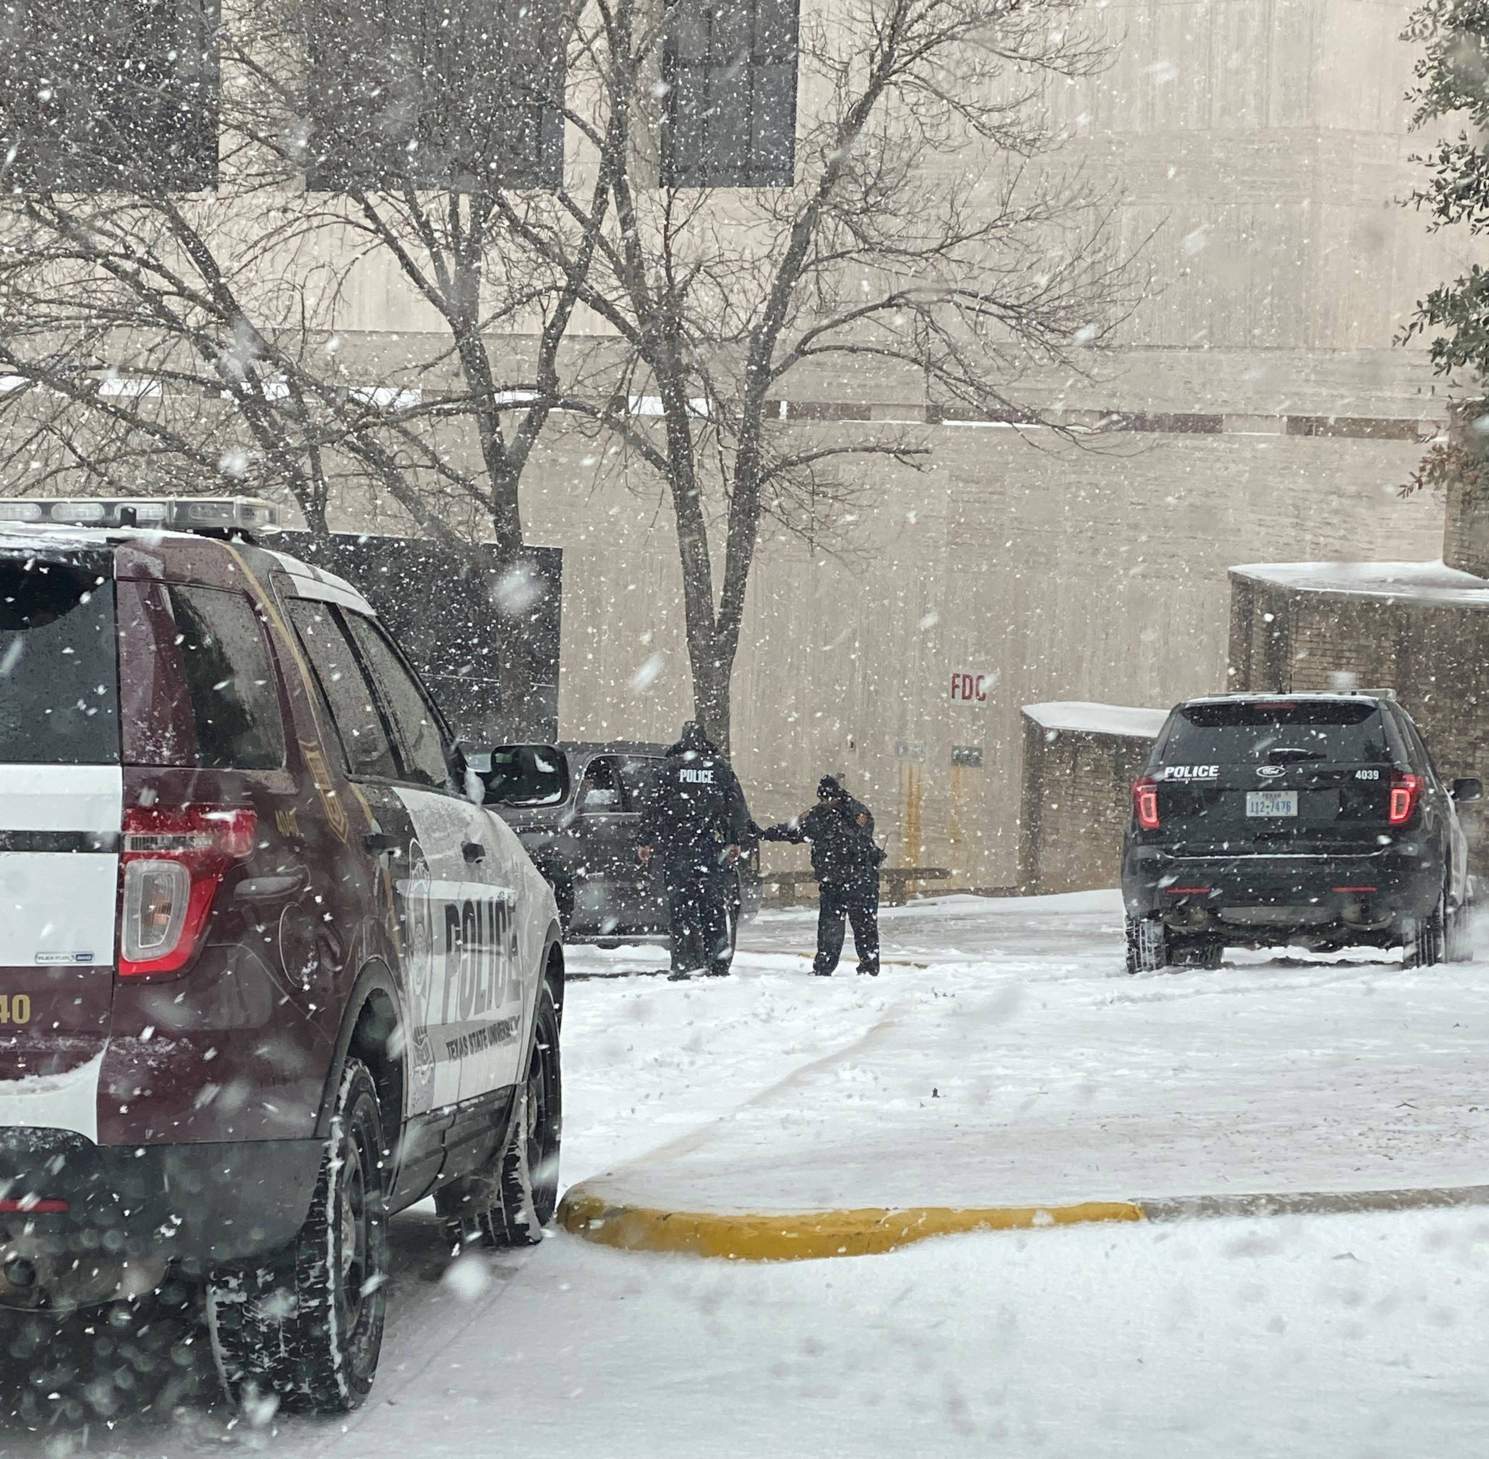 Officers Responding to calls in the snow